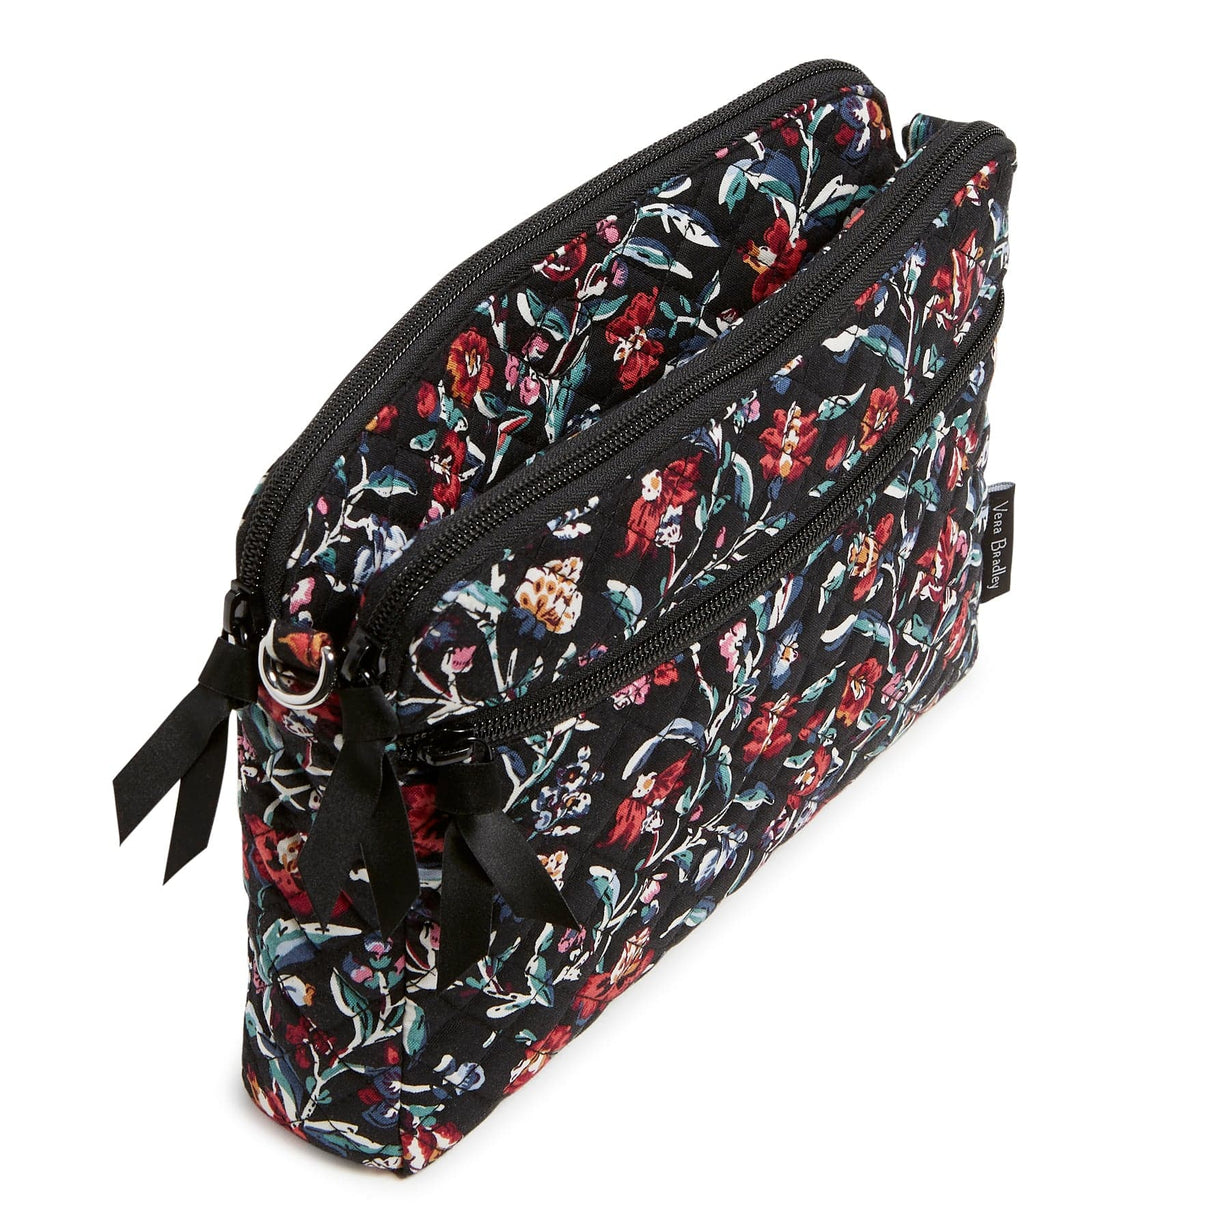 Triple Compartment Crossbody Bag - Recycled Cotton